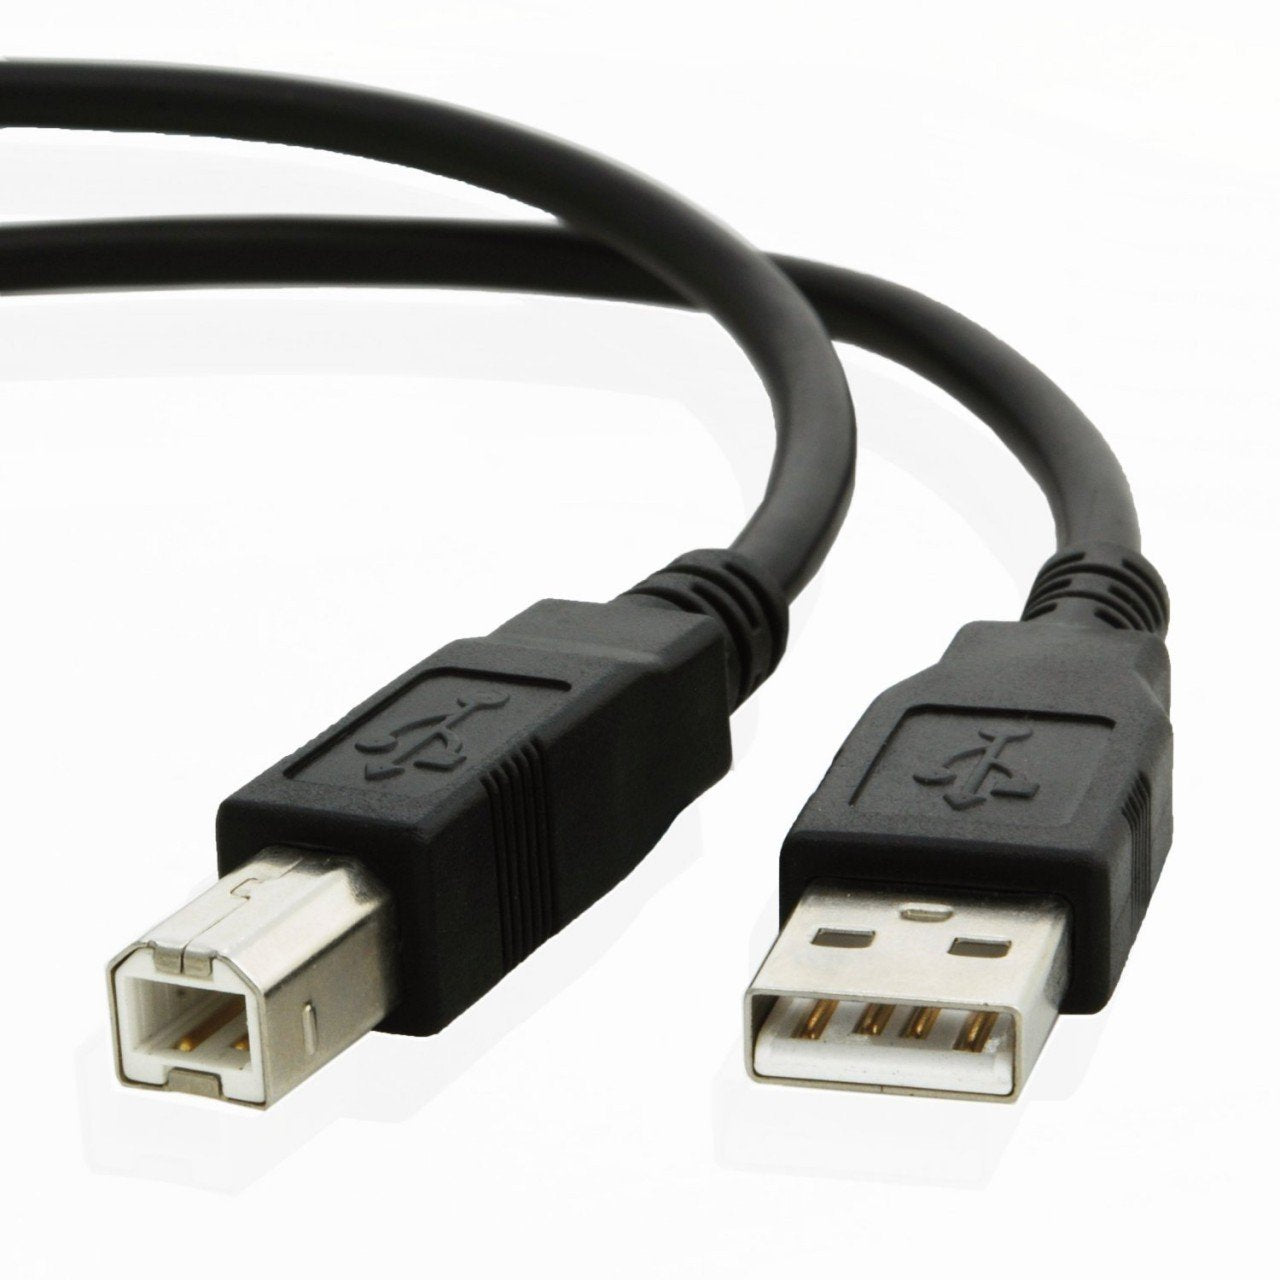 USB cable for Epson WORKFORCE WF-2630